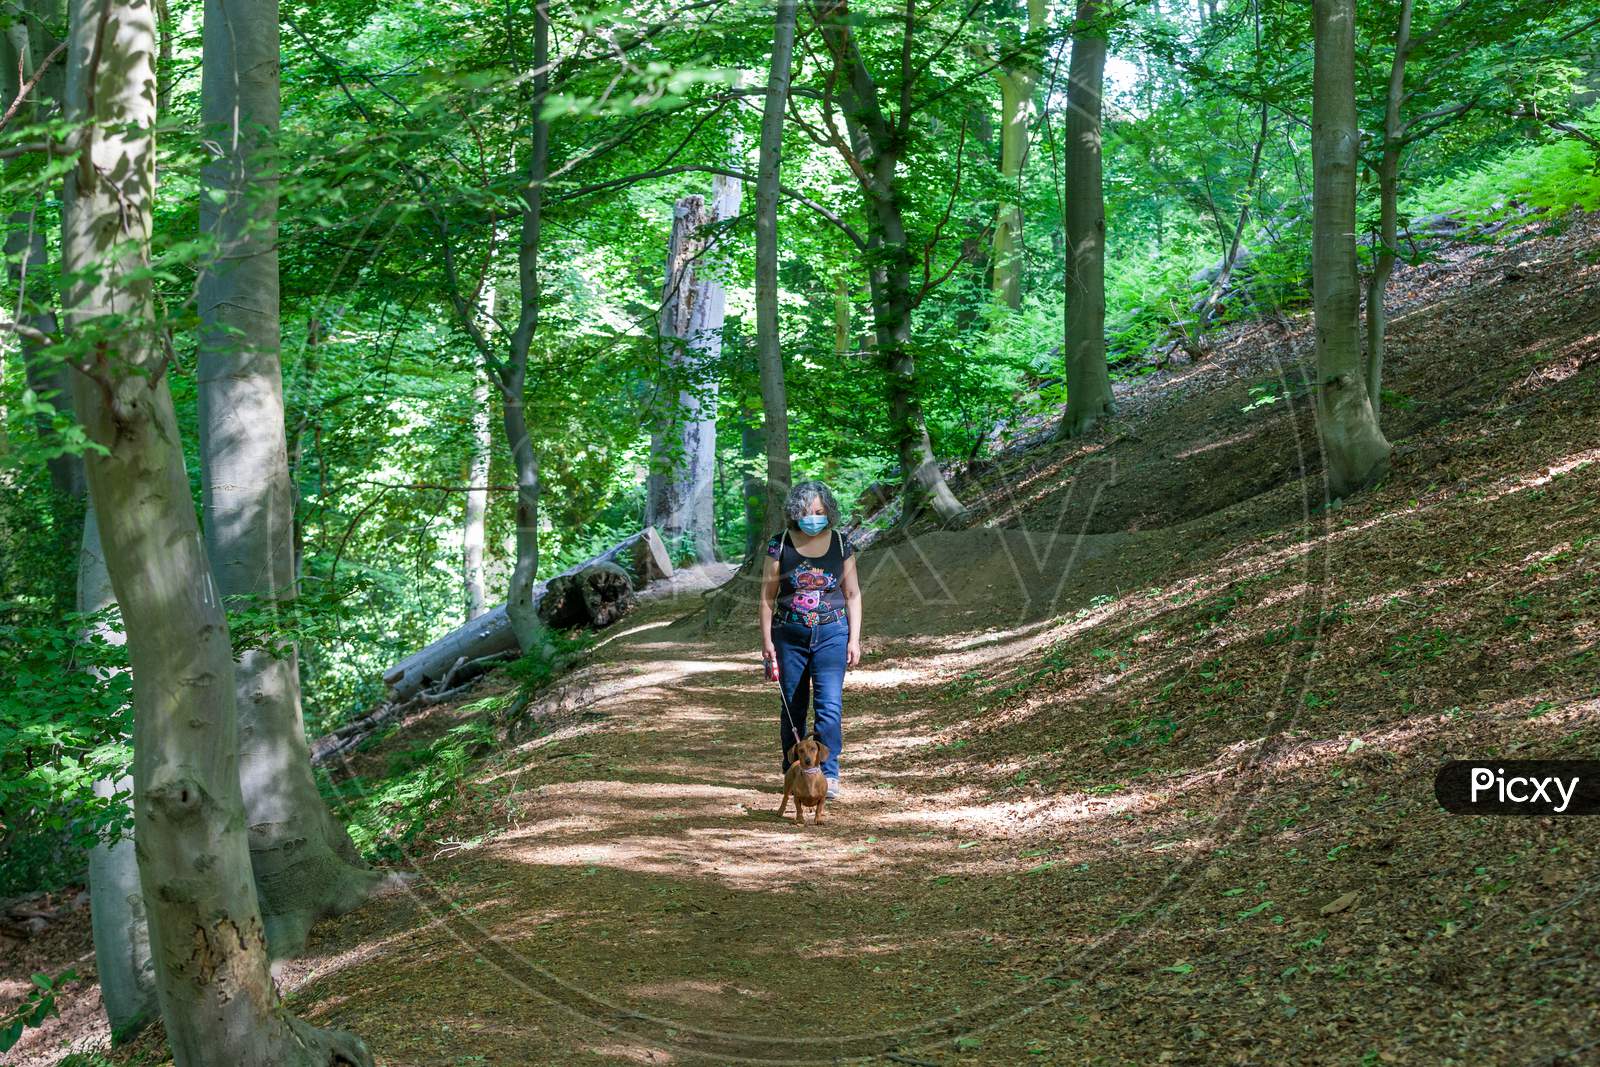 Woman In A Medical Mask Walking Calmly With Her Dog On A Path Among Trees With Green Foliage In The Forest, Avoiding The Spread Of Covid-19 Amid The Coronavirus Outbreak, Sunny Day In The Netherlands